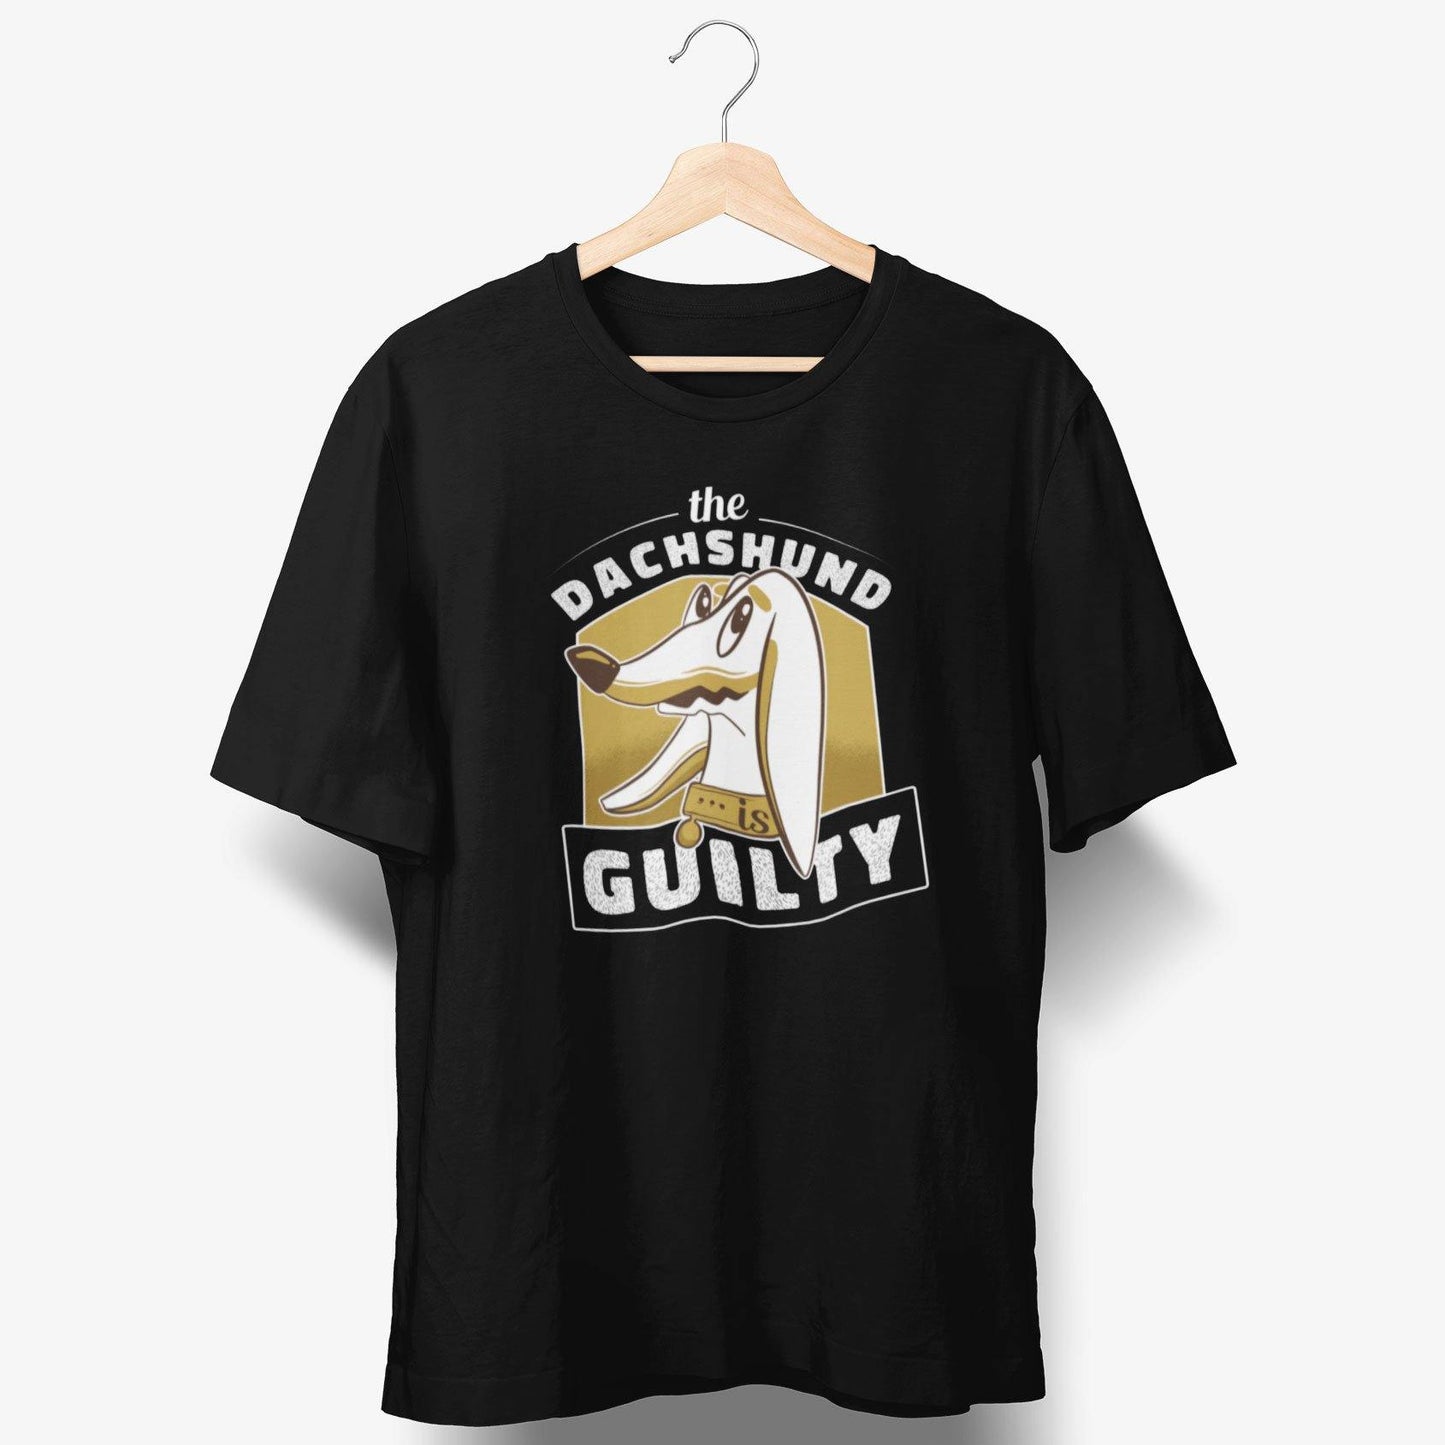 The Dachshund is guilty T-Shirt